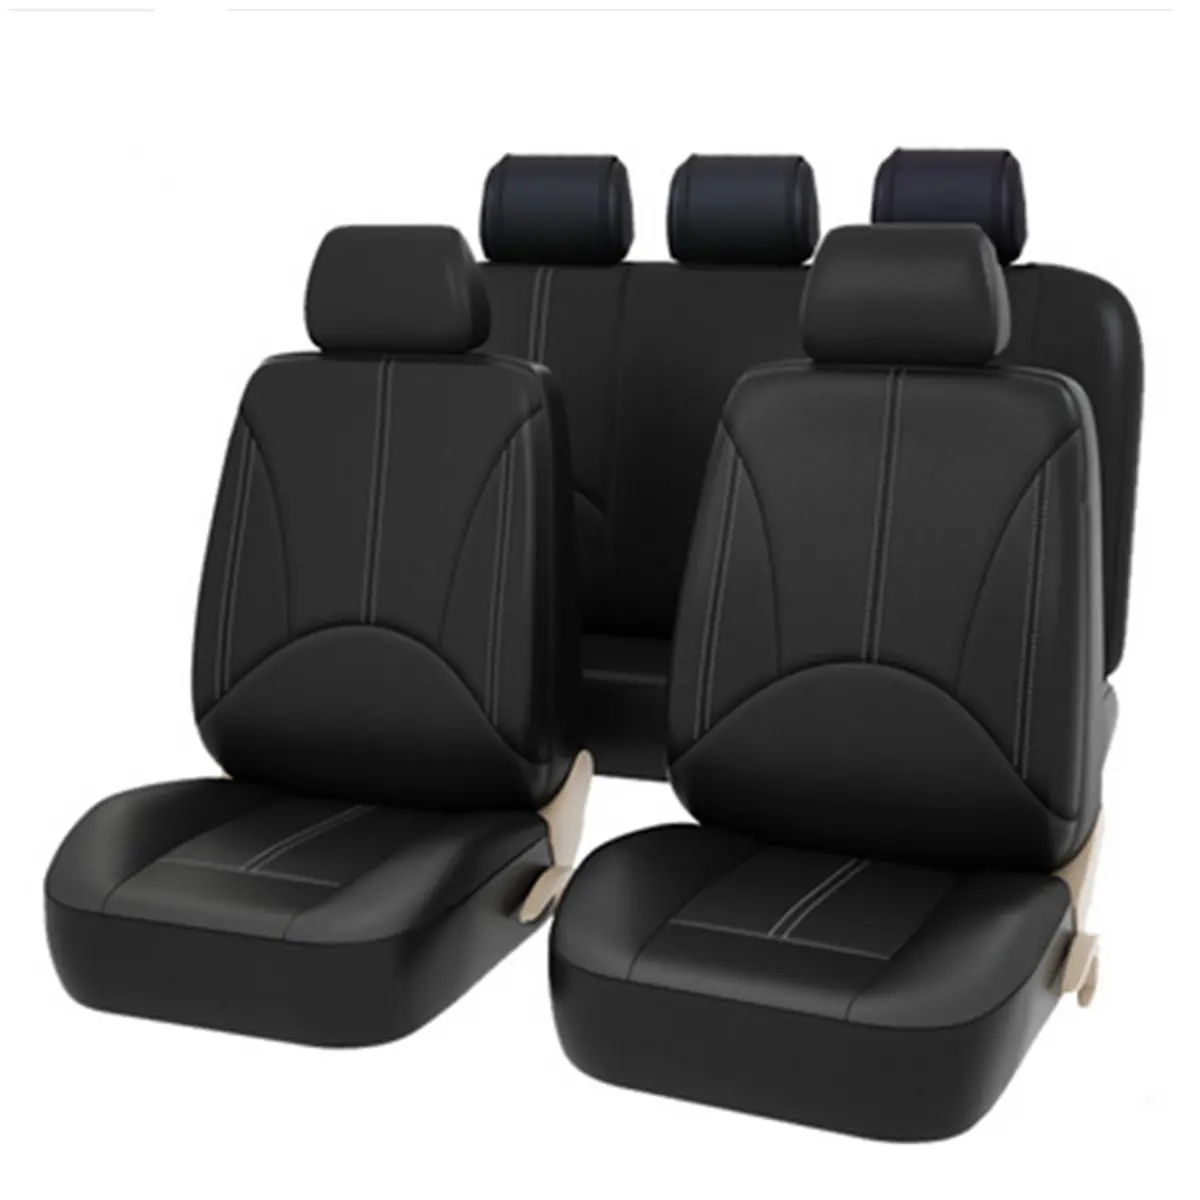 China Professional Design Car Cover Seats High Quality Leather Sit Seat Portable for mercedes benz/toyota/honda/